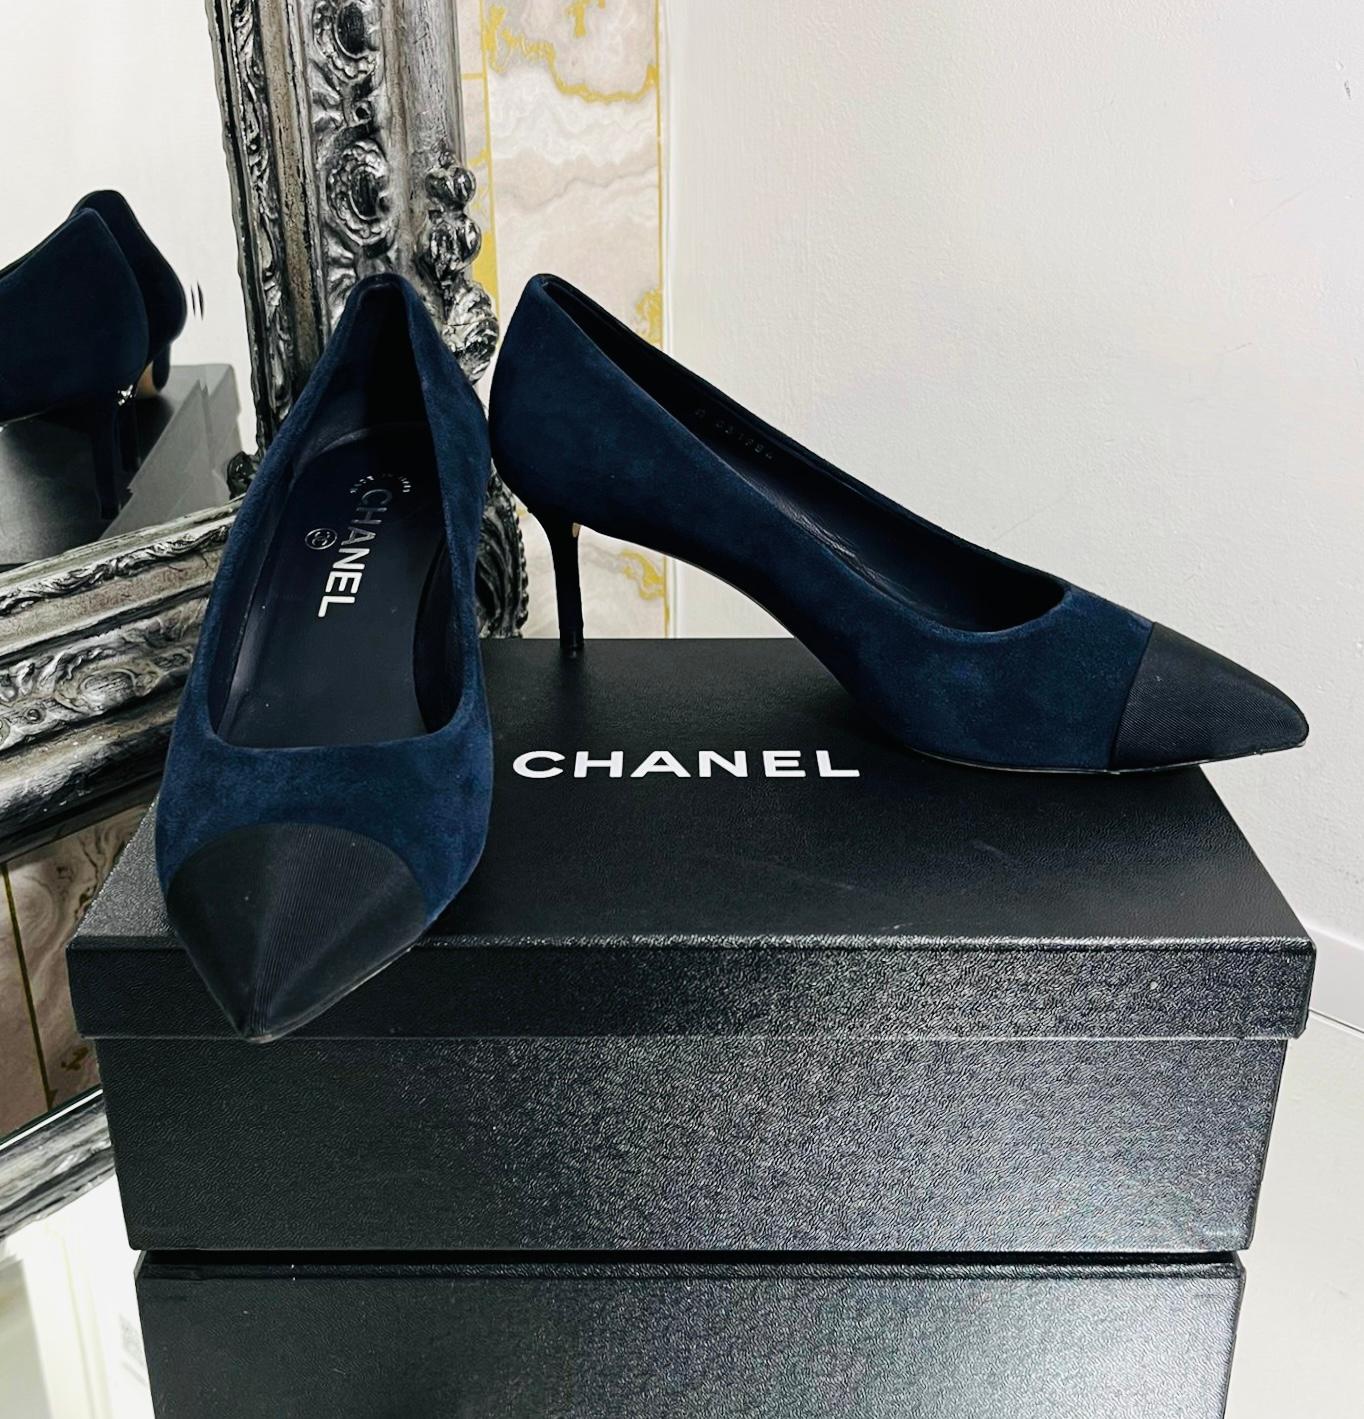 Chanel 'CC' Logo Suede Court Pumps

Navy heels designed with black, satin pointed toe.

Featuring gold 'CC' logo embellishment to the stiletto heel.

Styled with leather lining and insoles.

Size – 38

Condition – Very Good

Composition –